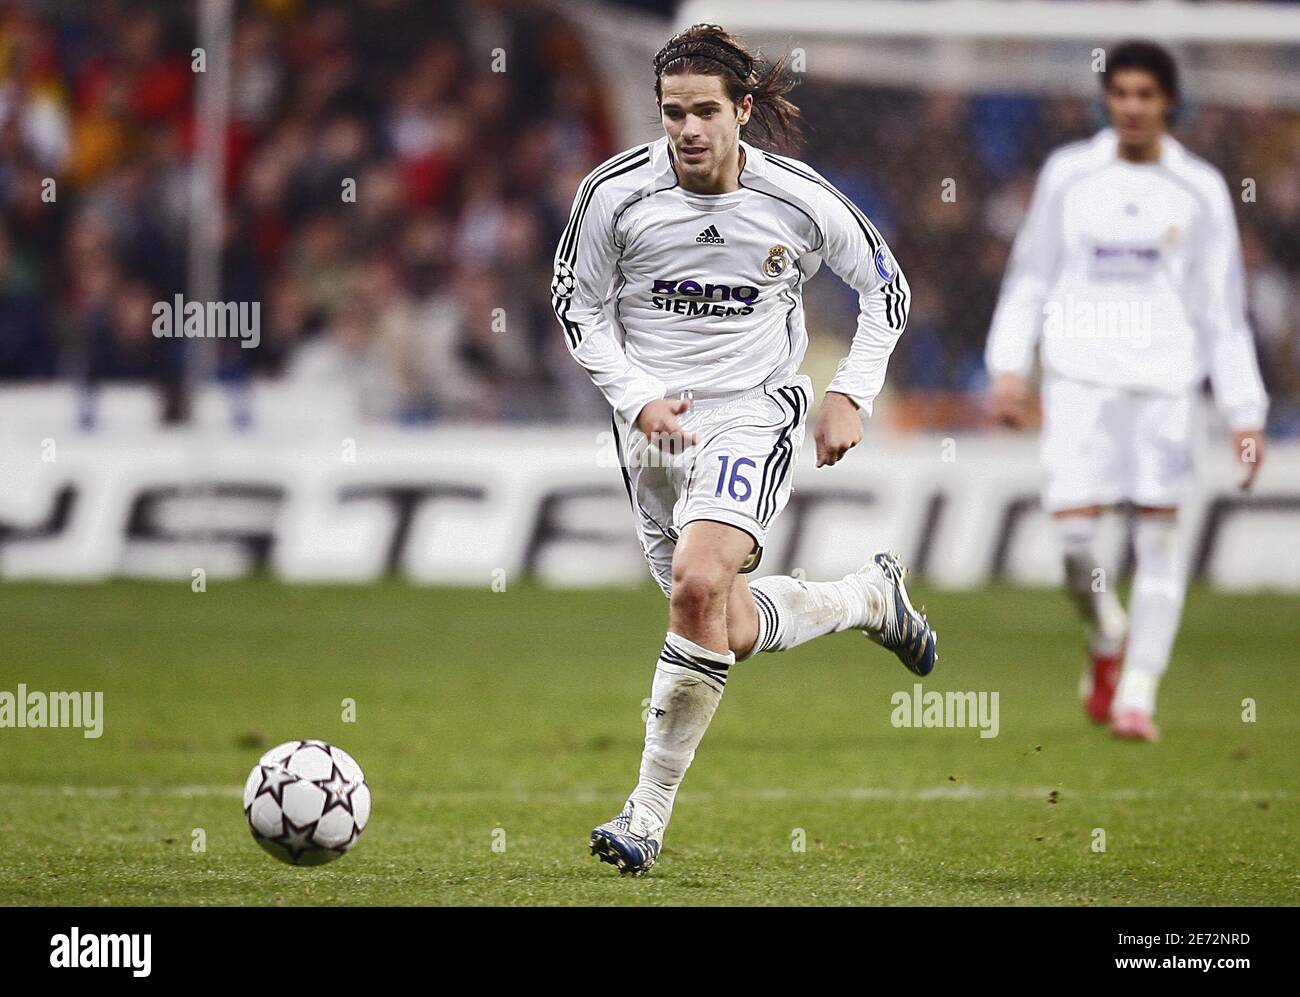 Real Madrid's Fernando Gago in action during the Champions League first knockout round, first leg soccer match, Real Madrid vs Bayern Munich in Madrid. Real Madrid won 3-2. Photo by Christian Liewig/ABACAPRESS.COM Stock Photo